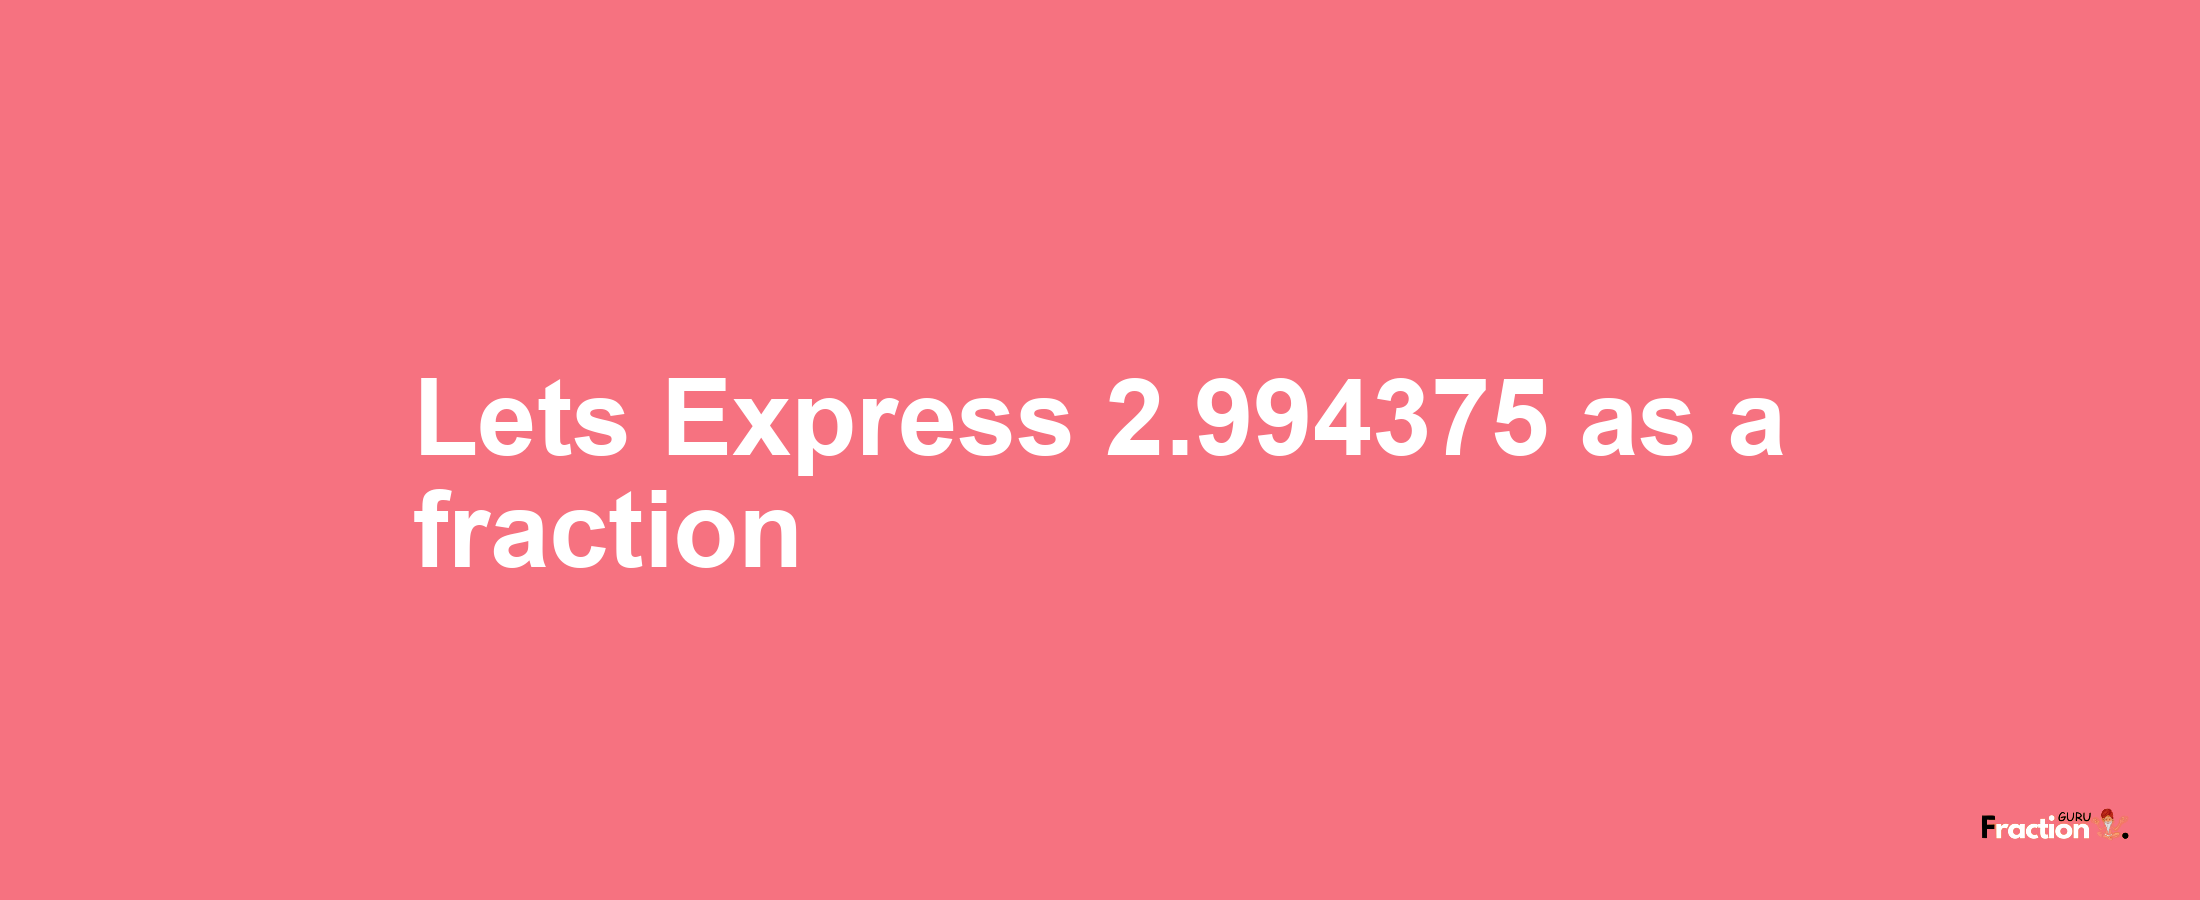 Lets Express 2.994375 as afraction